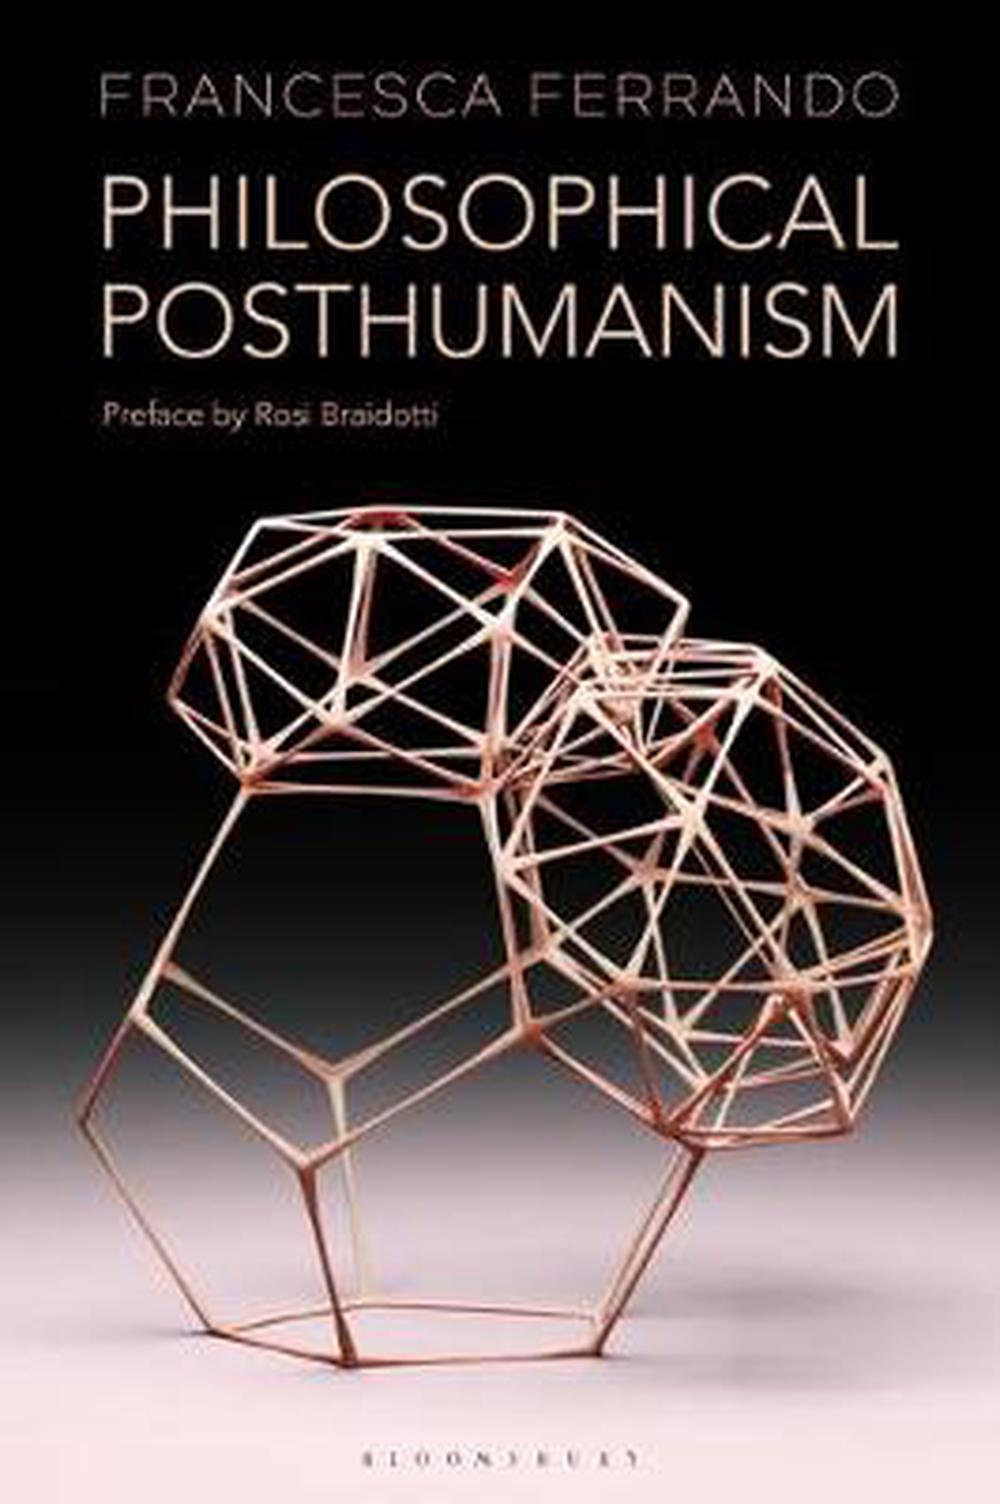 Traditions of Yoga in Existential Posthuman Praxis: Response to Francesca Ferrando’s “Philosophical Posthumanism”